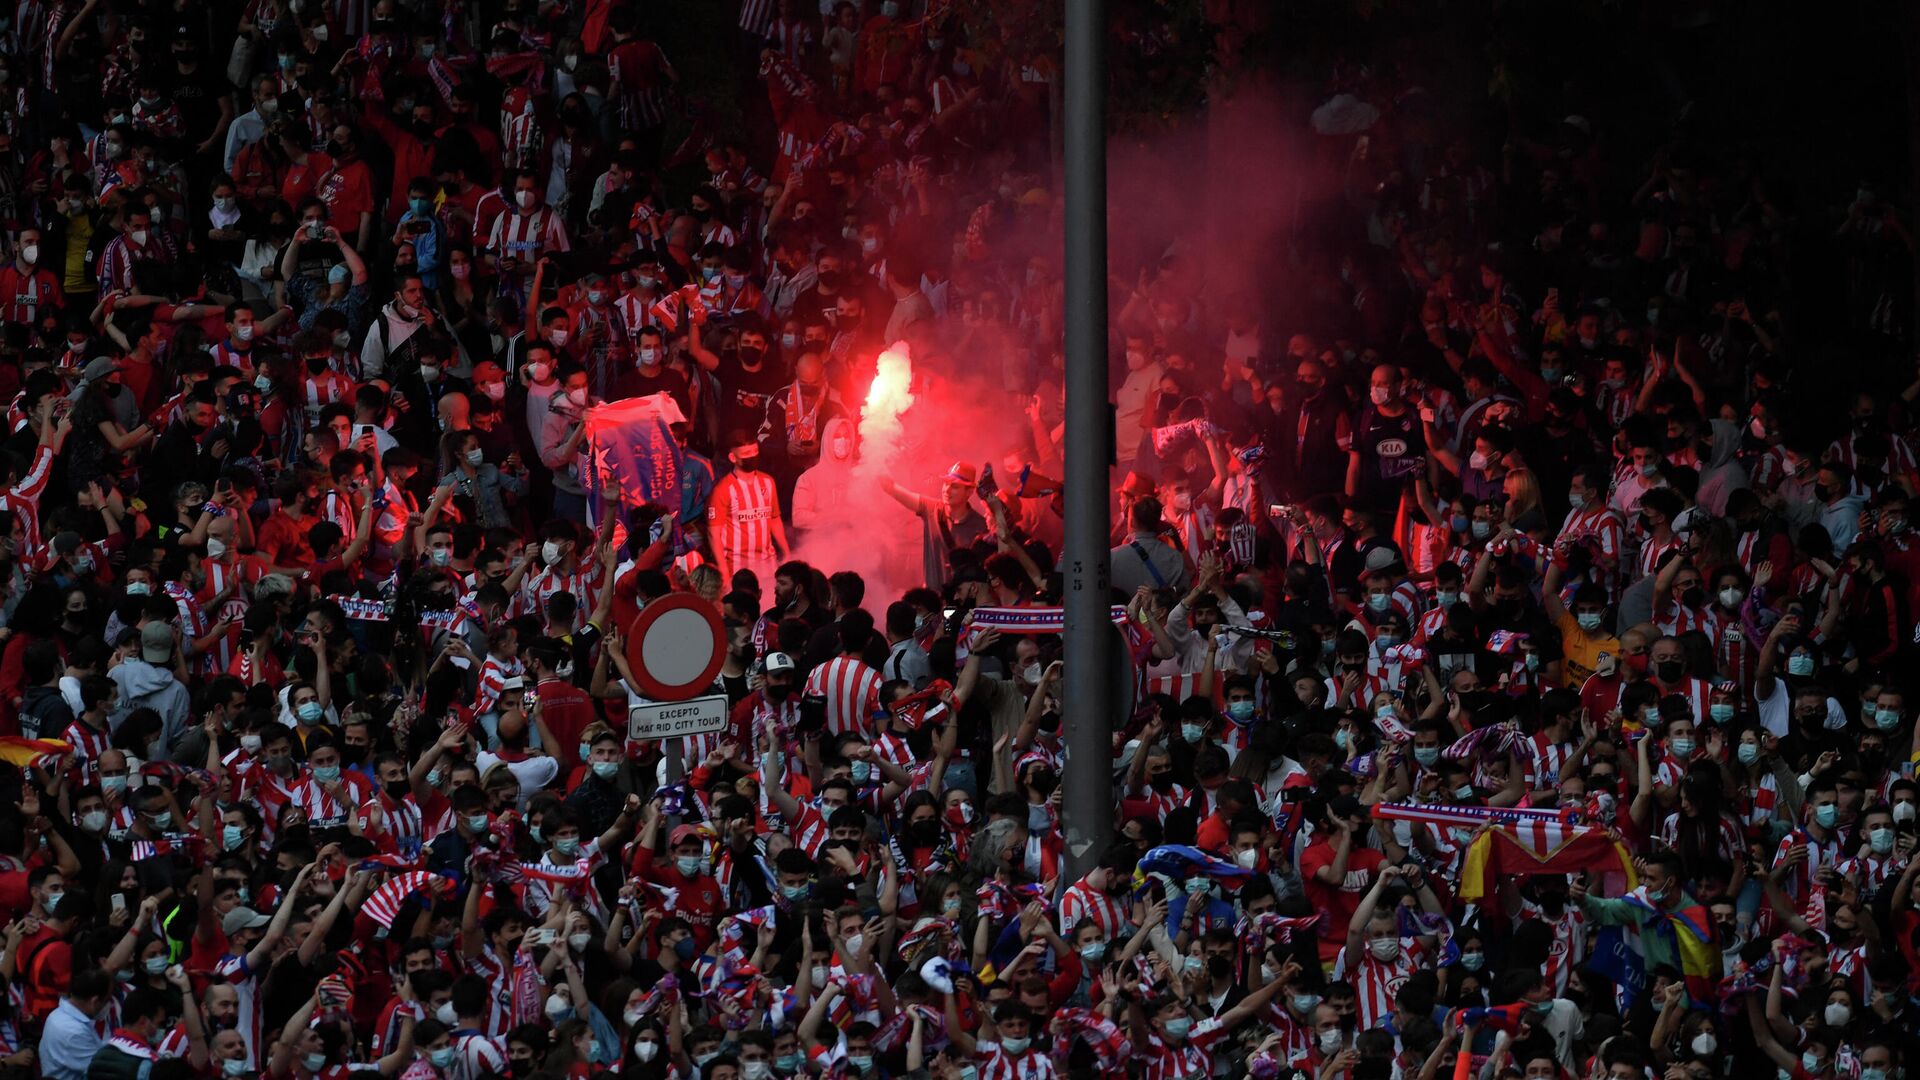 Supporters light flares after Atletico Madrid won the Spanish Liga Championship title on May 22, 2021 in Madrid. - Atletico Madrid were crowned La Liga champions for the first time since 2014 as veteran striker Luis Suarez scored the winner in a 2-1 victory over Valladolid. (Photo by OSCAR DEL POZO / AFP) - РИА Новости, 1920, 23.05.2021